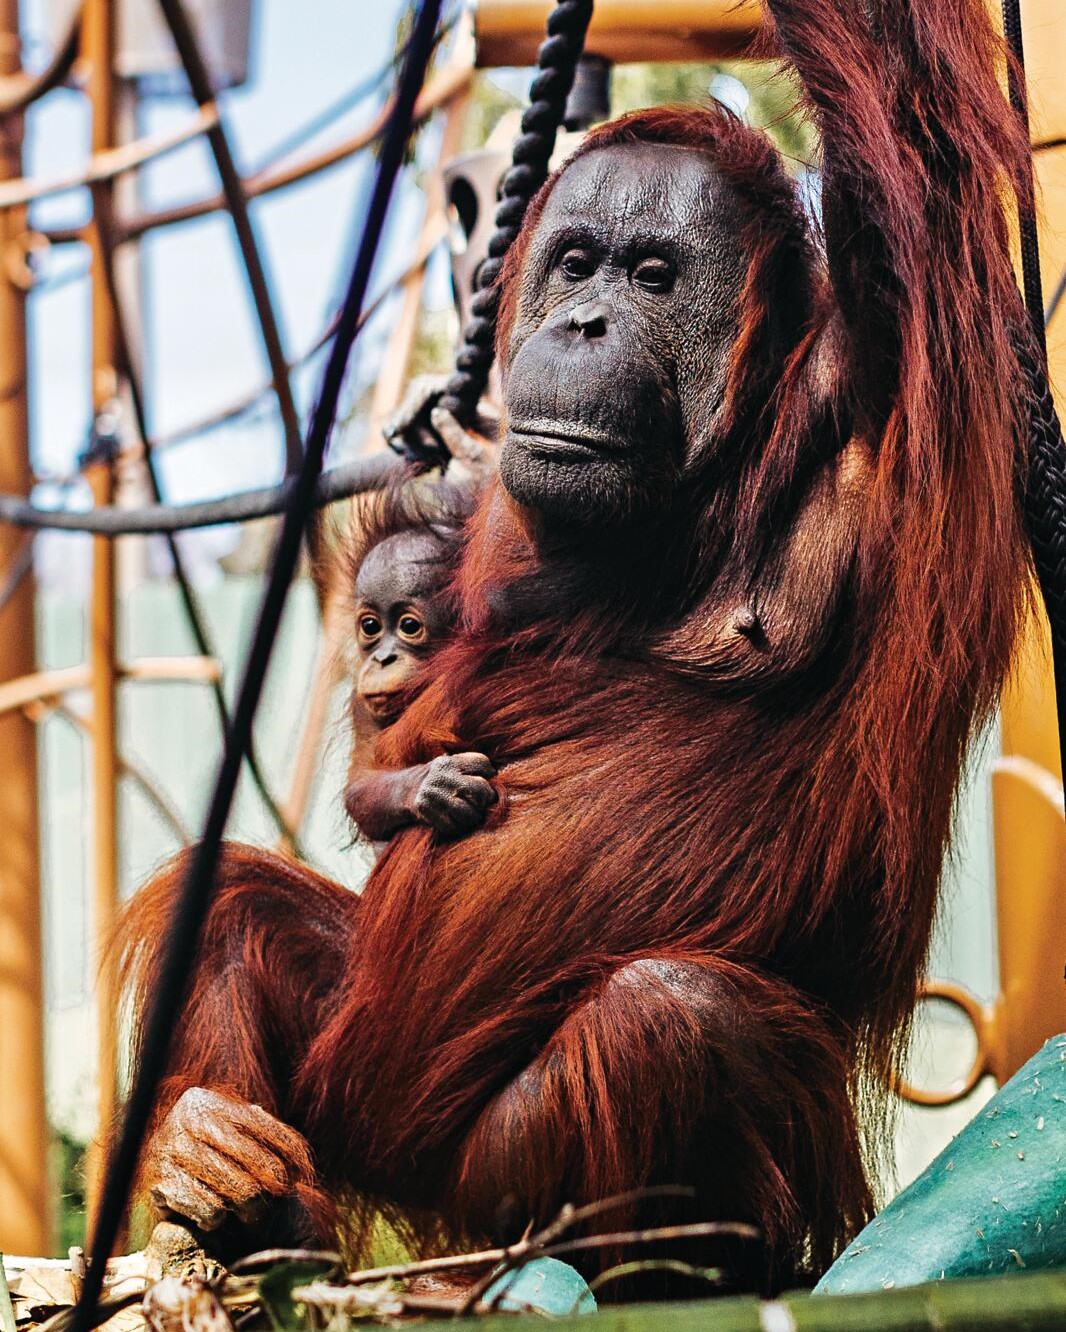 Close-up of an orangutan and her baby hanging on a rope playground at Auckland Zoo.